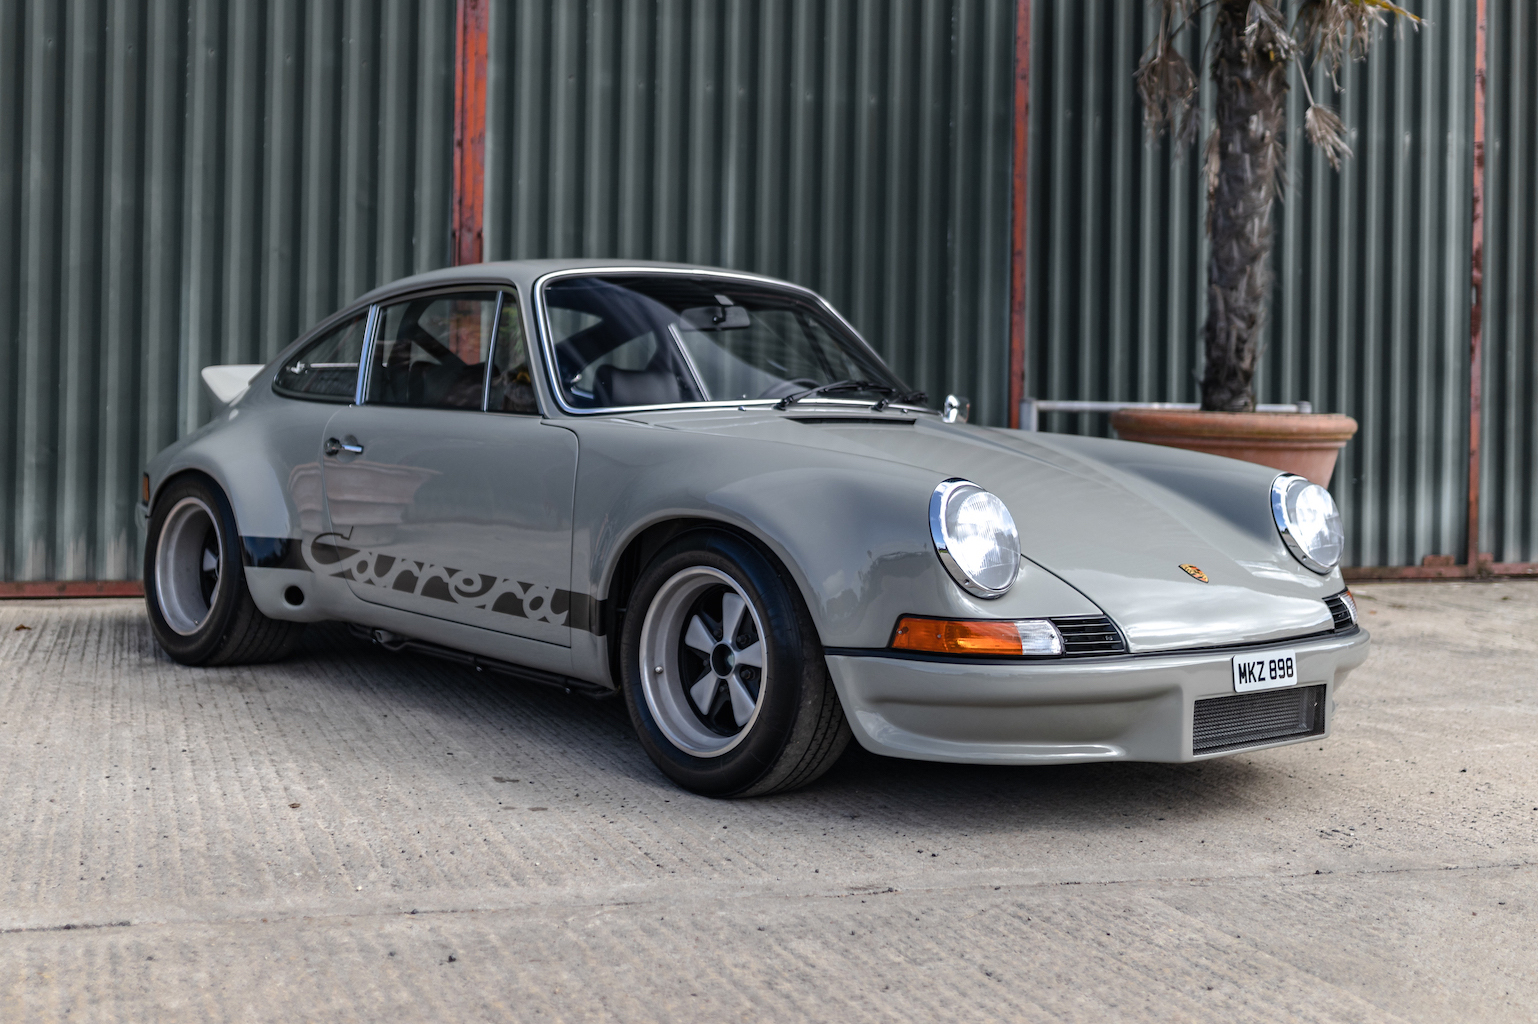 1977 PORSCHE 911 CARRERA 2.8 RSR RECREATION for sale by auction in